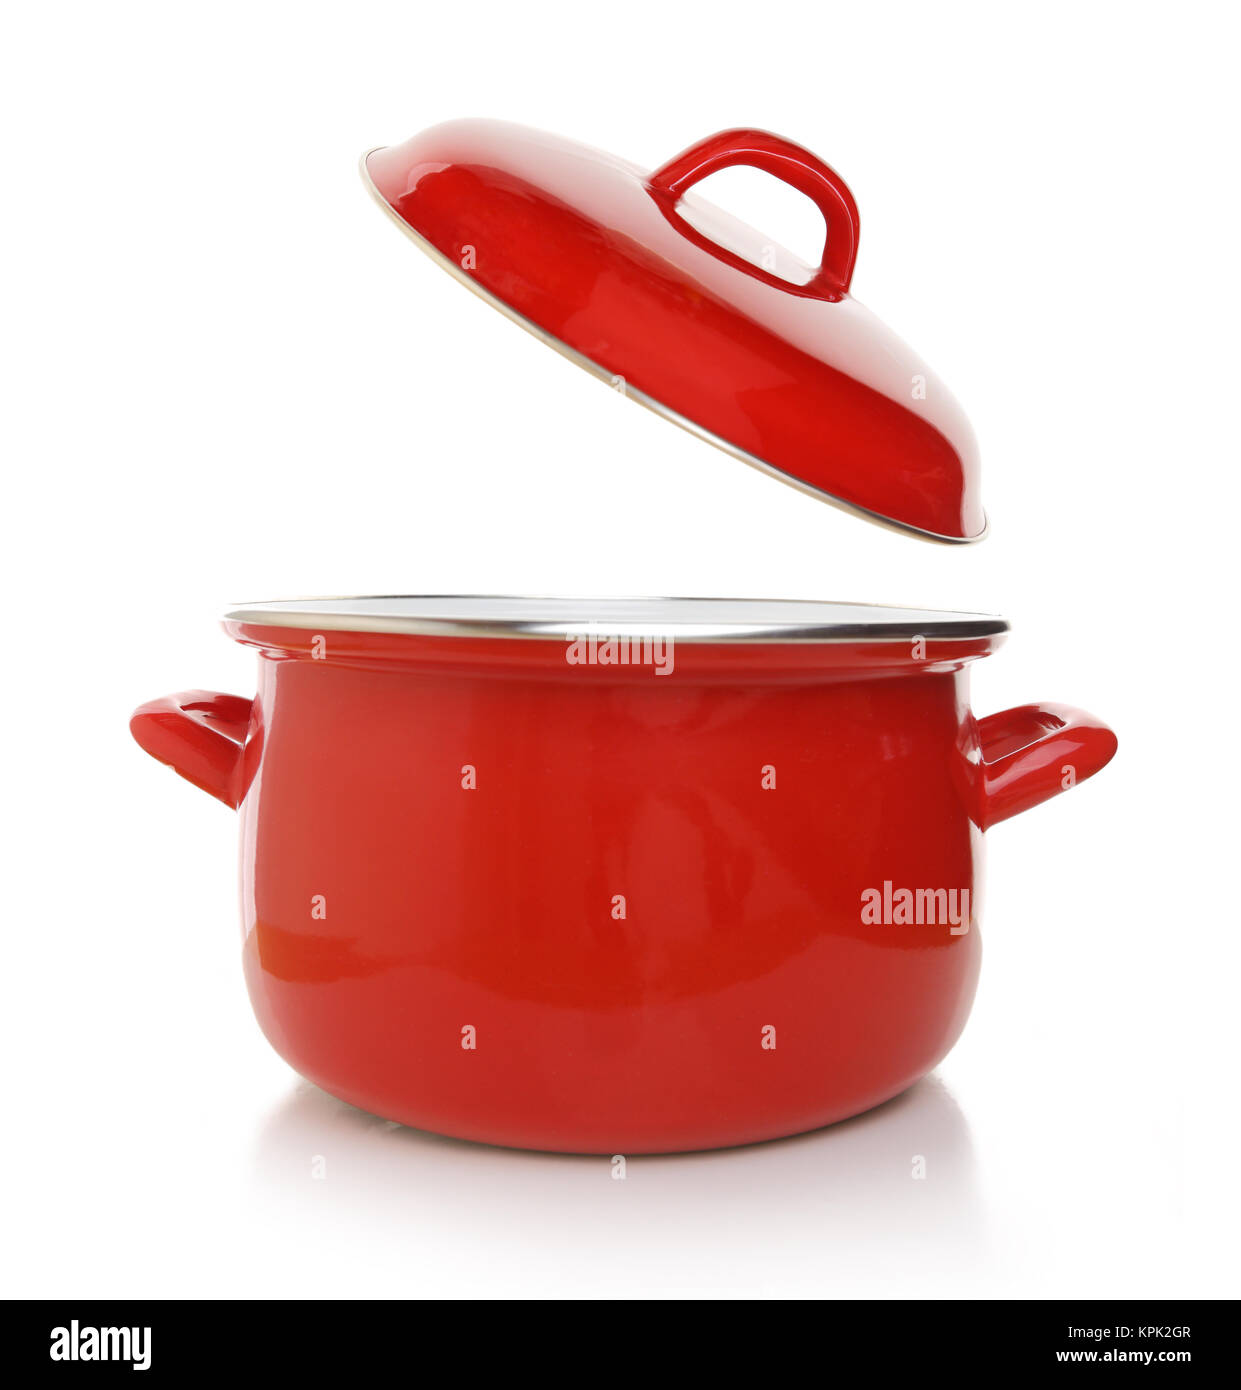 Red cooking pot isolated on white background Stock Photo